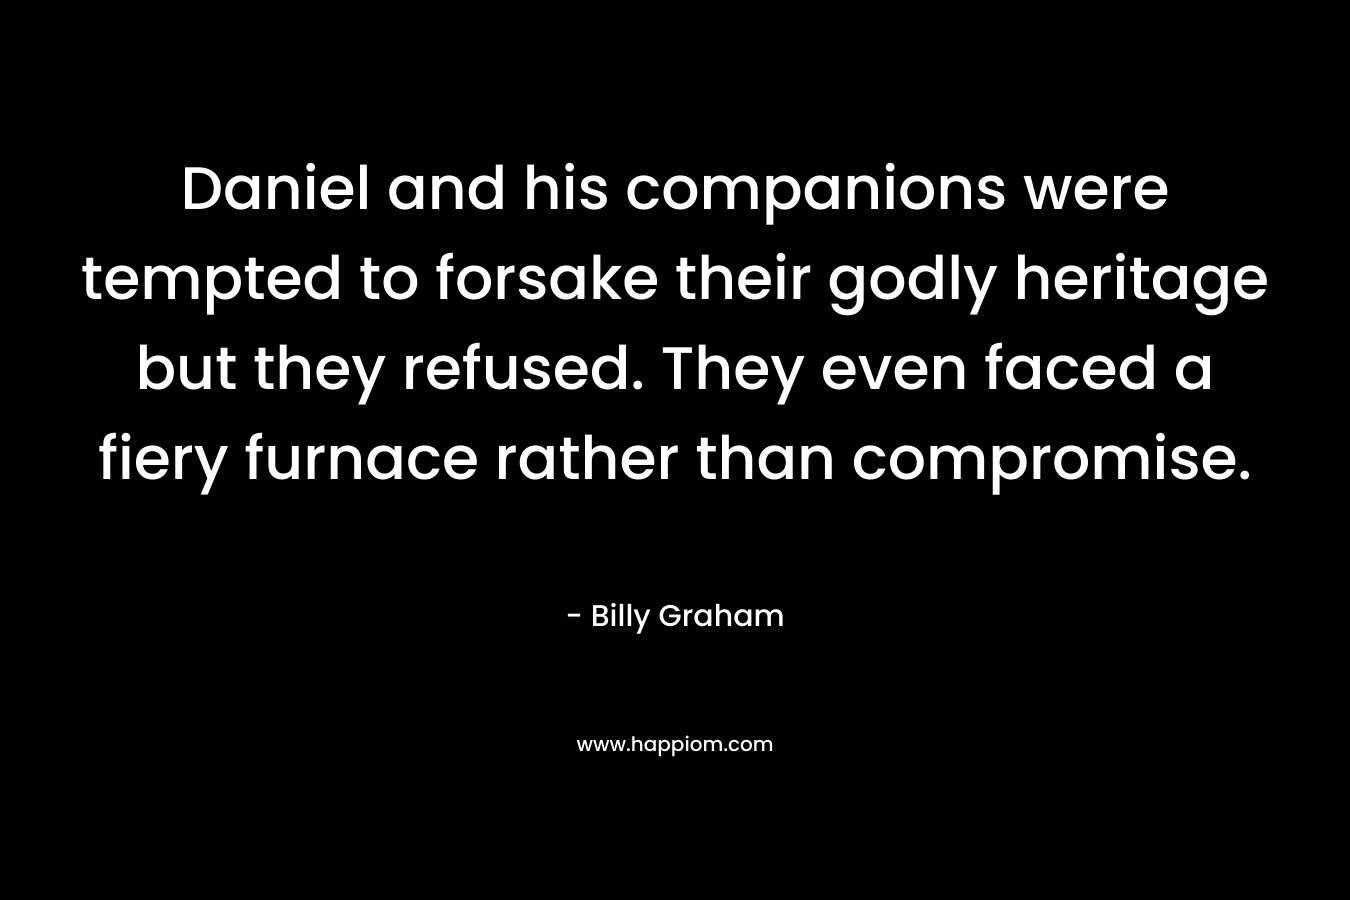 Daniel and his companions were tempted to forsake their godly heritage but they refused. They even faced a fiery furnace rather than compromise. – Billy Graham